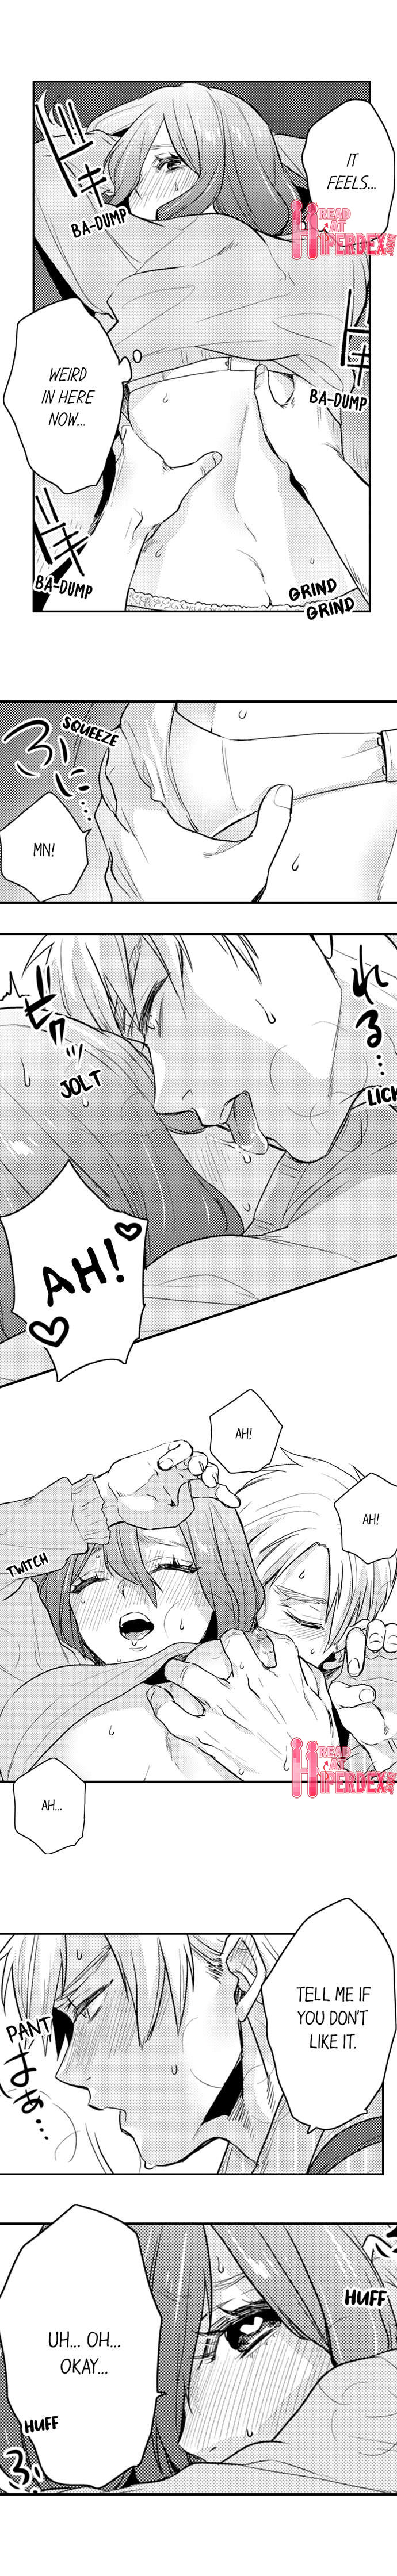 The Massage ♂♀ The Pleasure of Full Course Sex - Chapter 4 Page 6